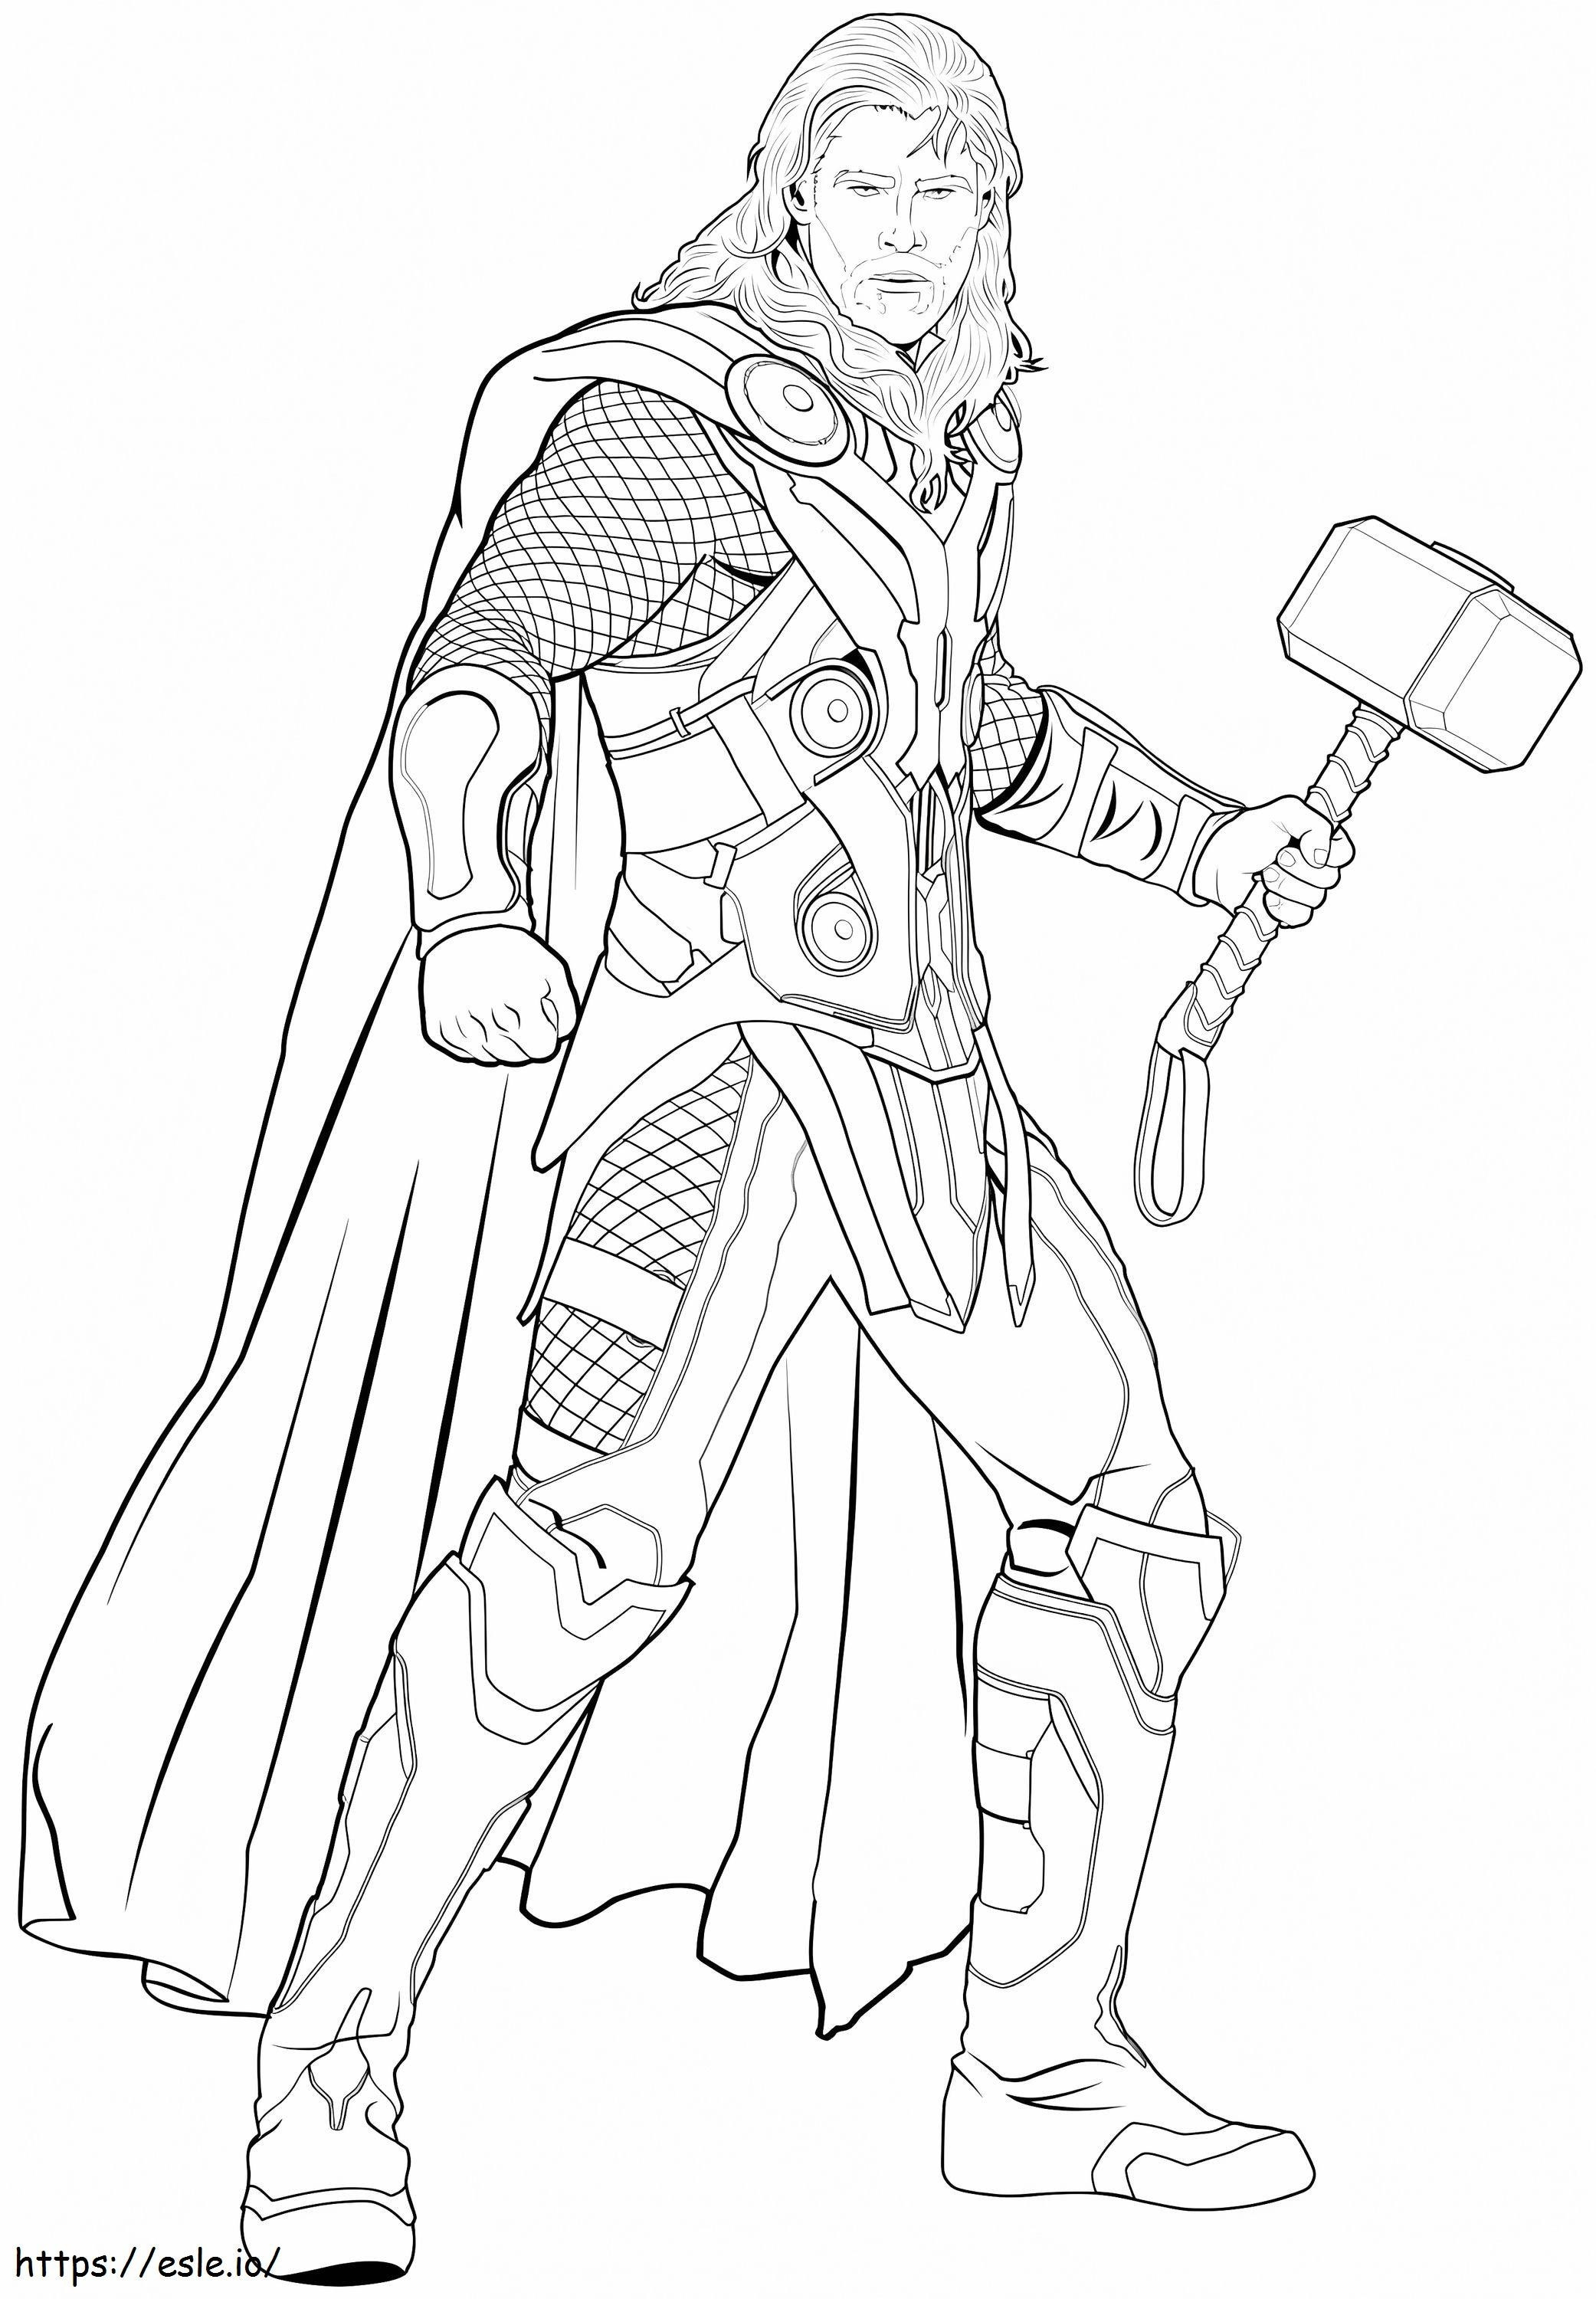 Thor Holding Mjolnir coloring page